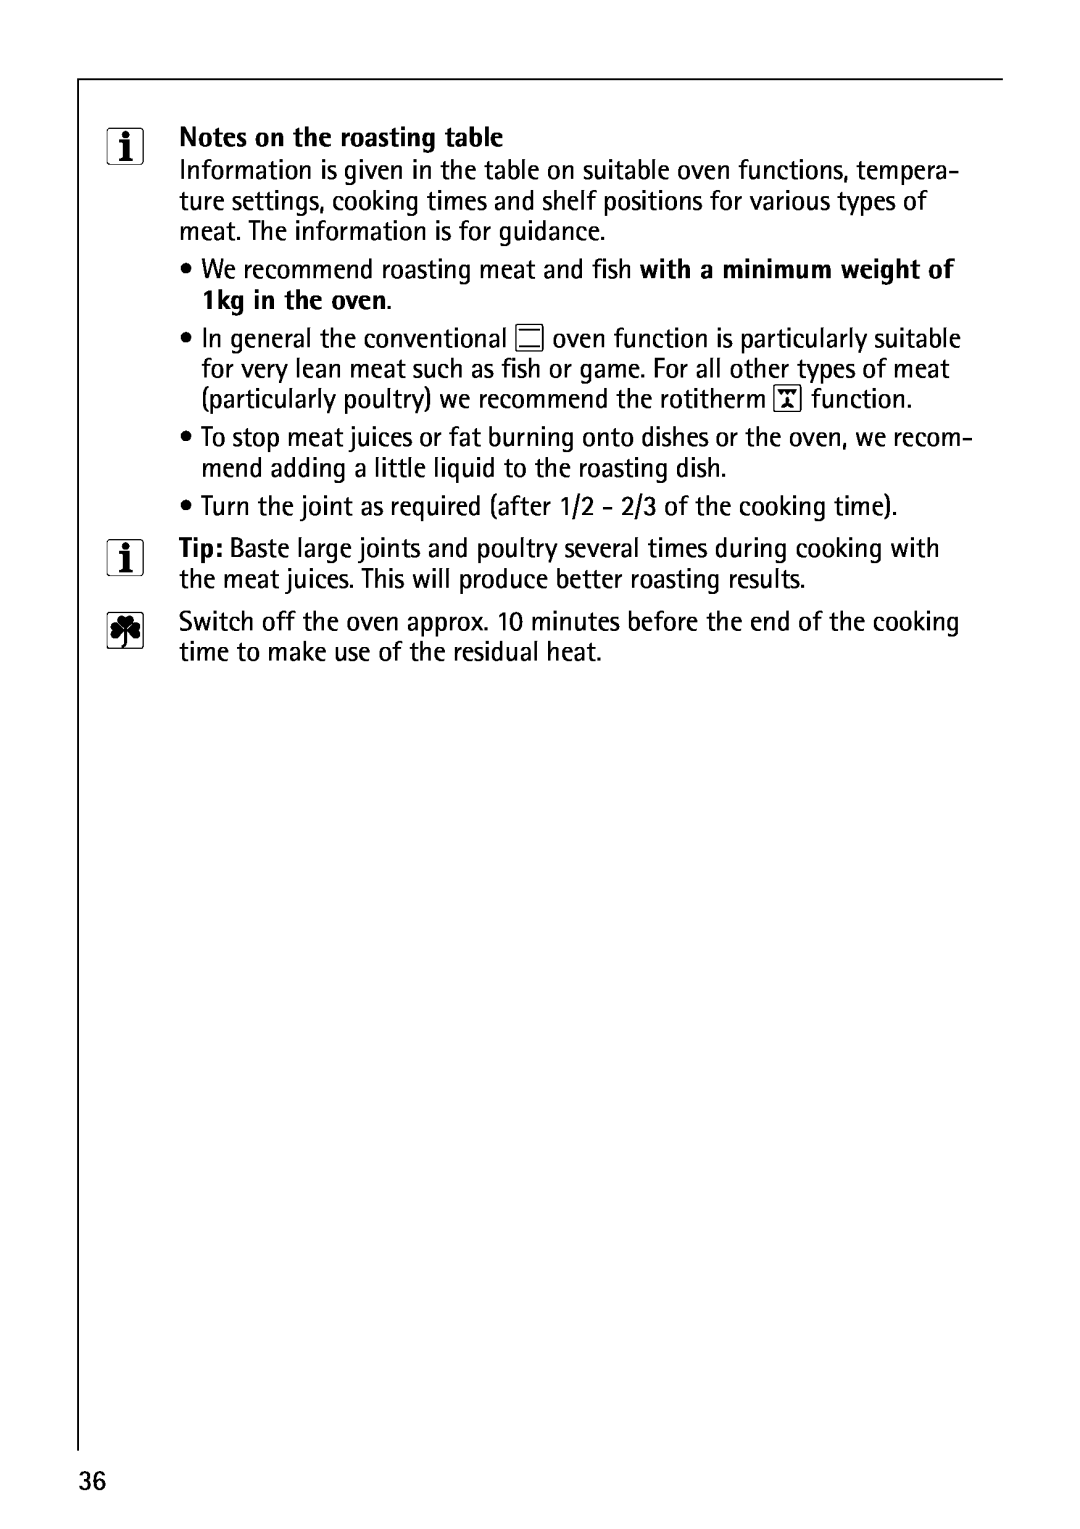 AEG B4130-1 operating instructions Notes on the roasting table, 1kg in the oven 